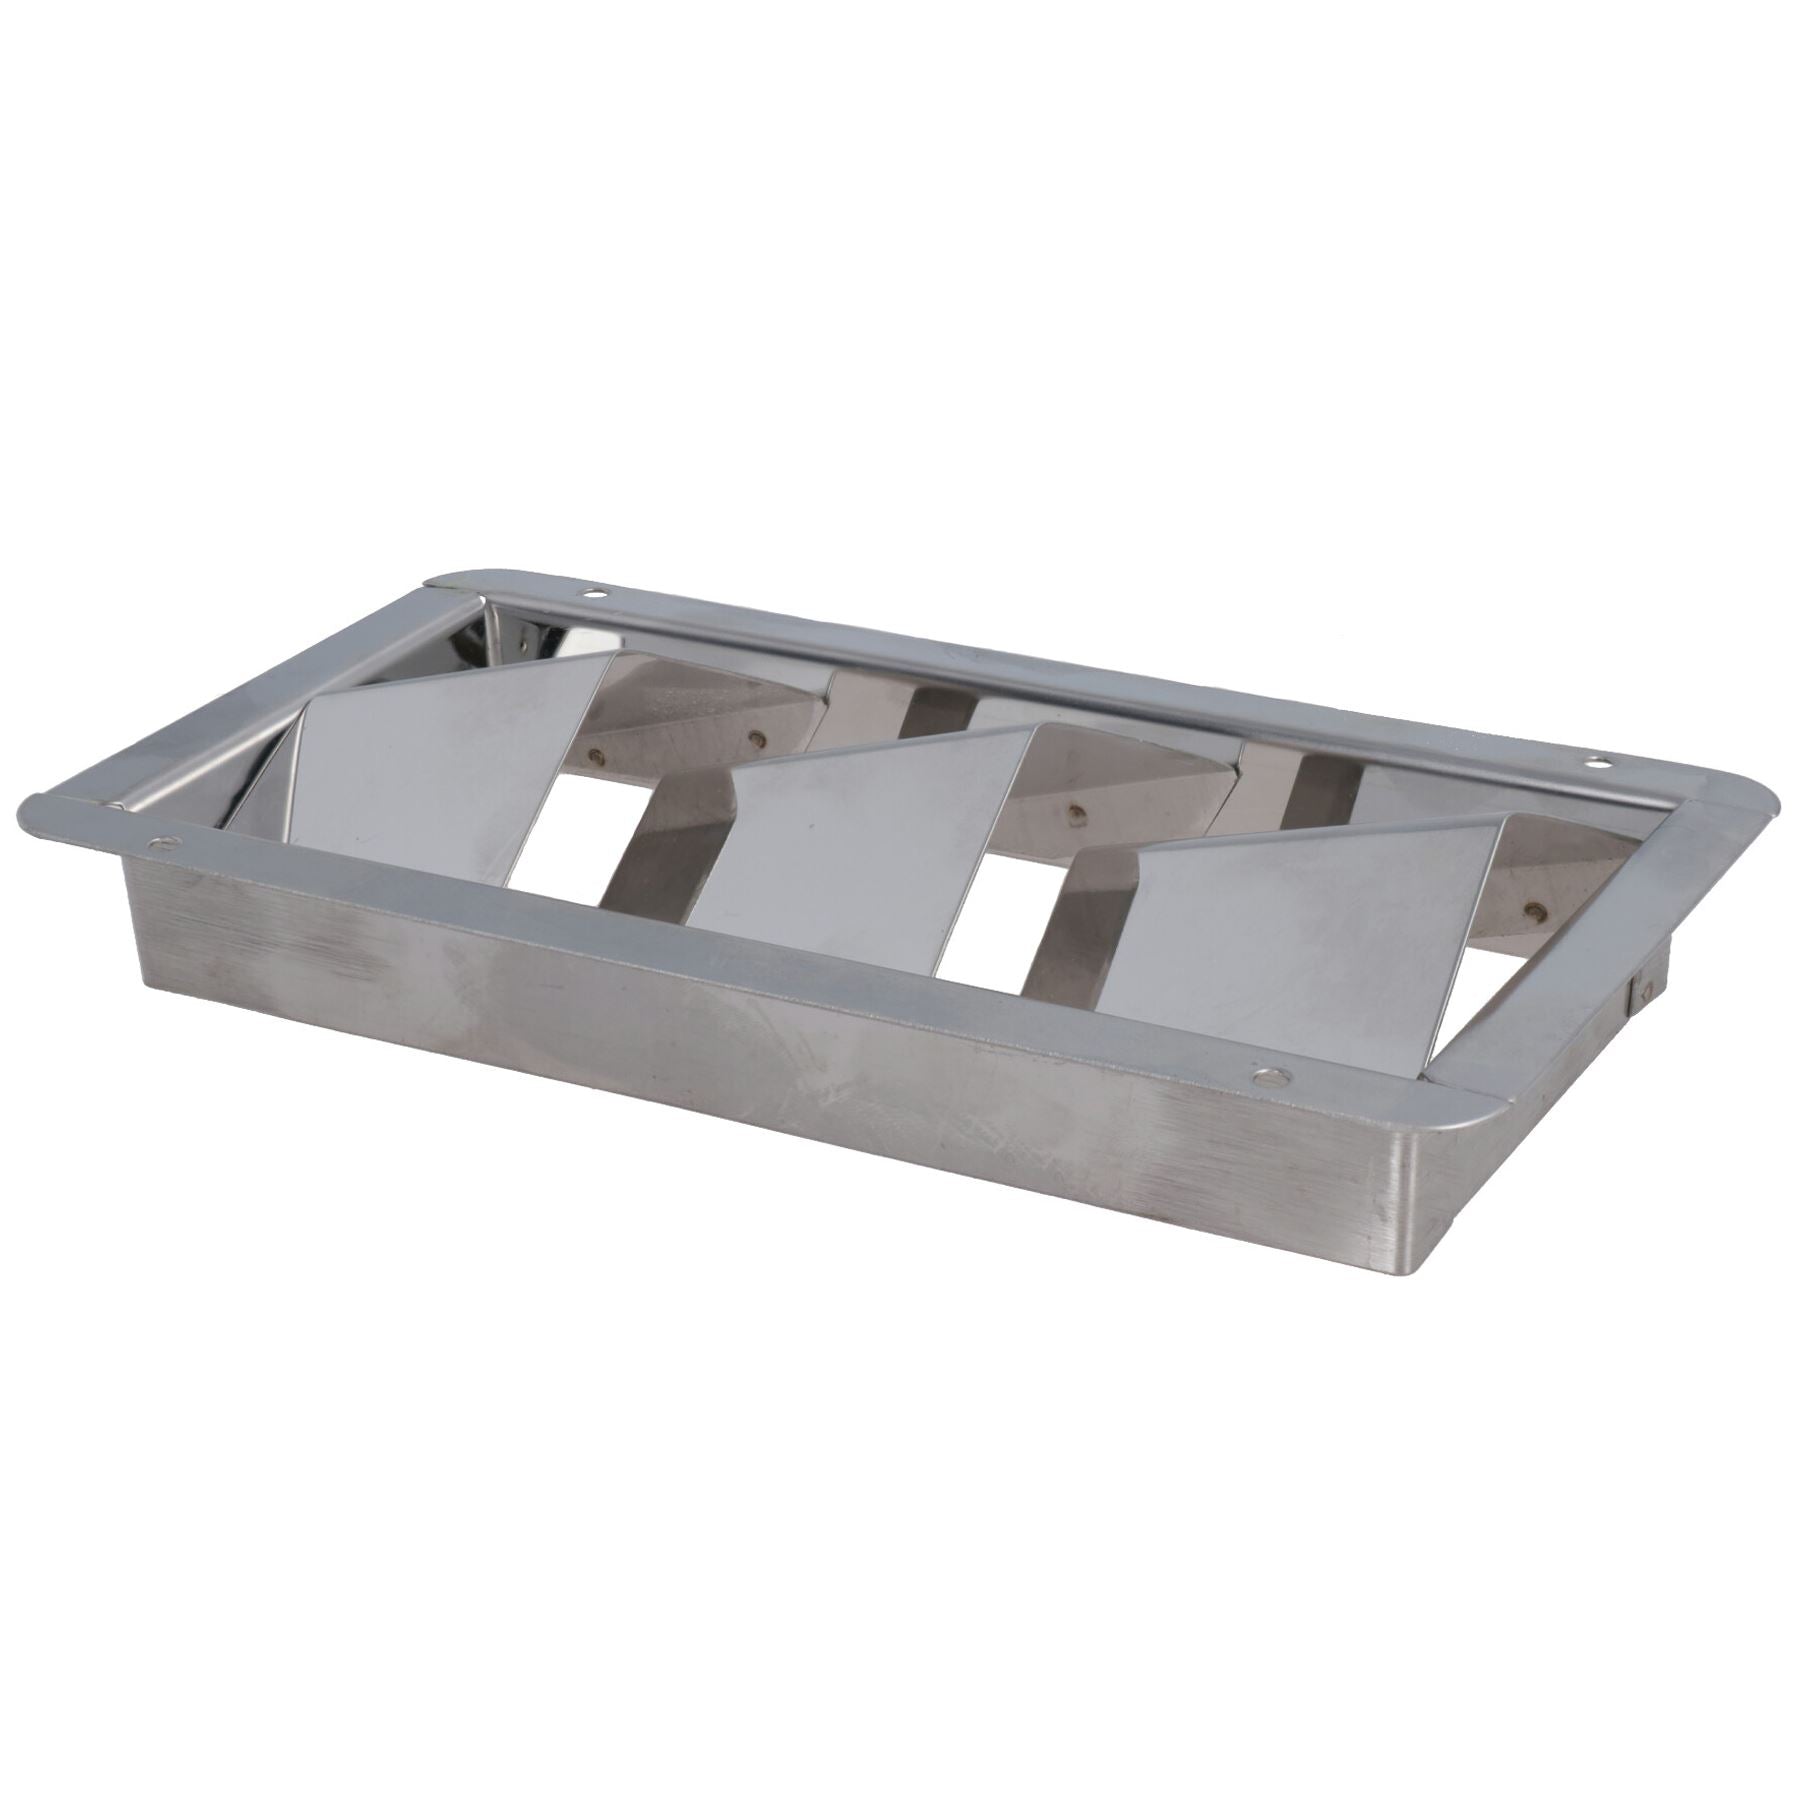 Stainless Steel Vent Louvre Ventilator Grill Boat Engine Bay Marine Polished